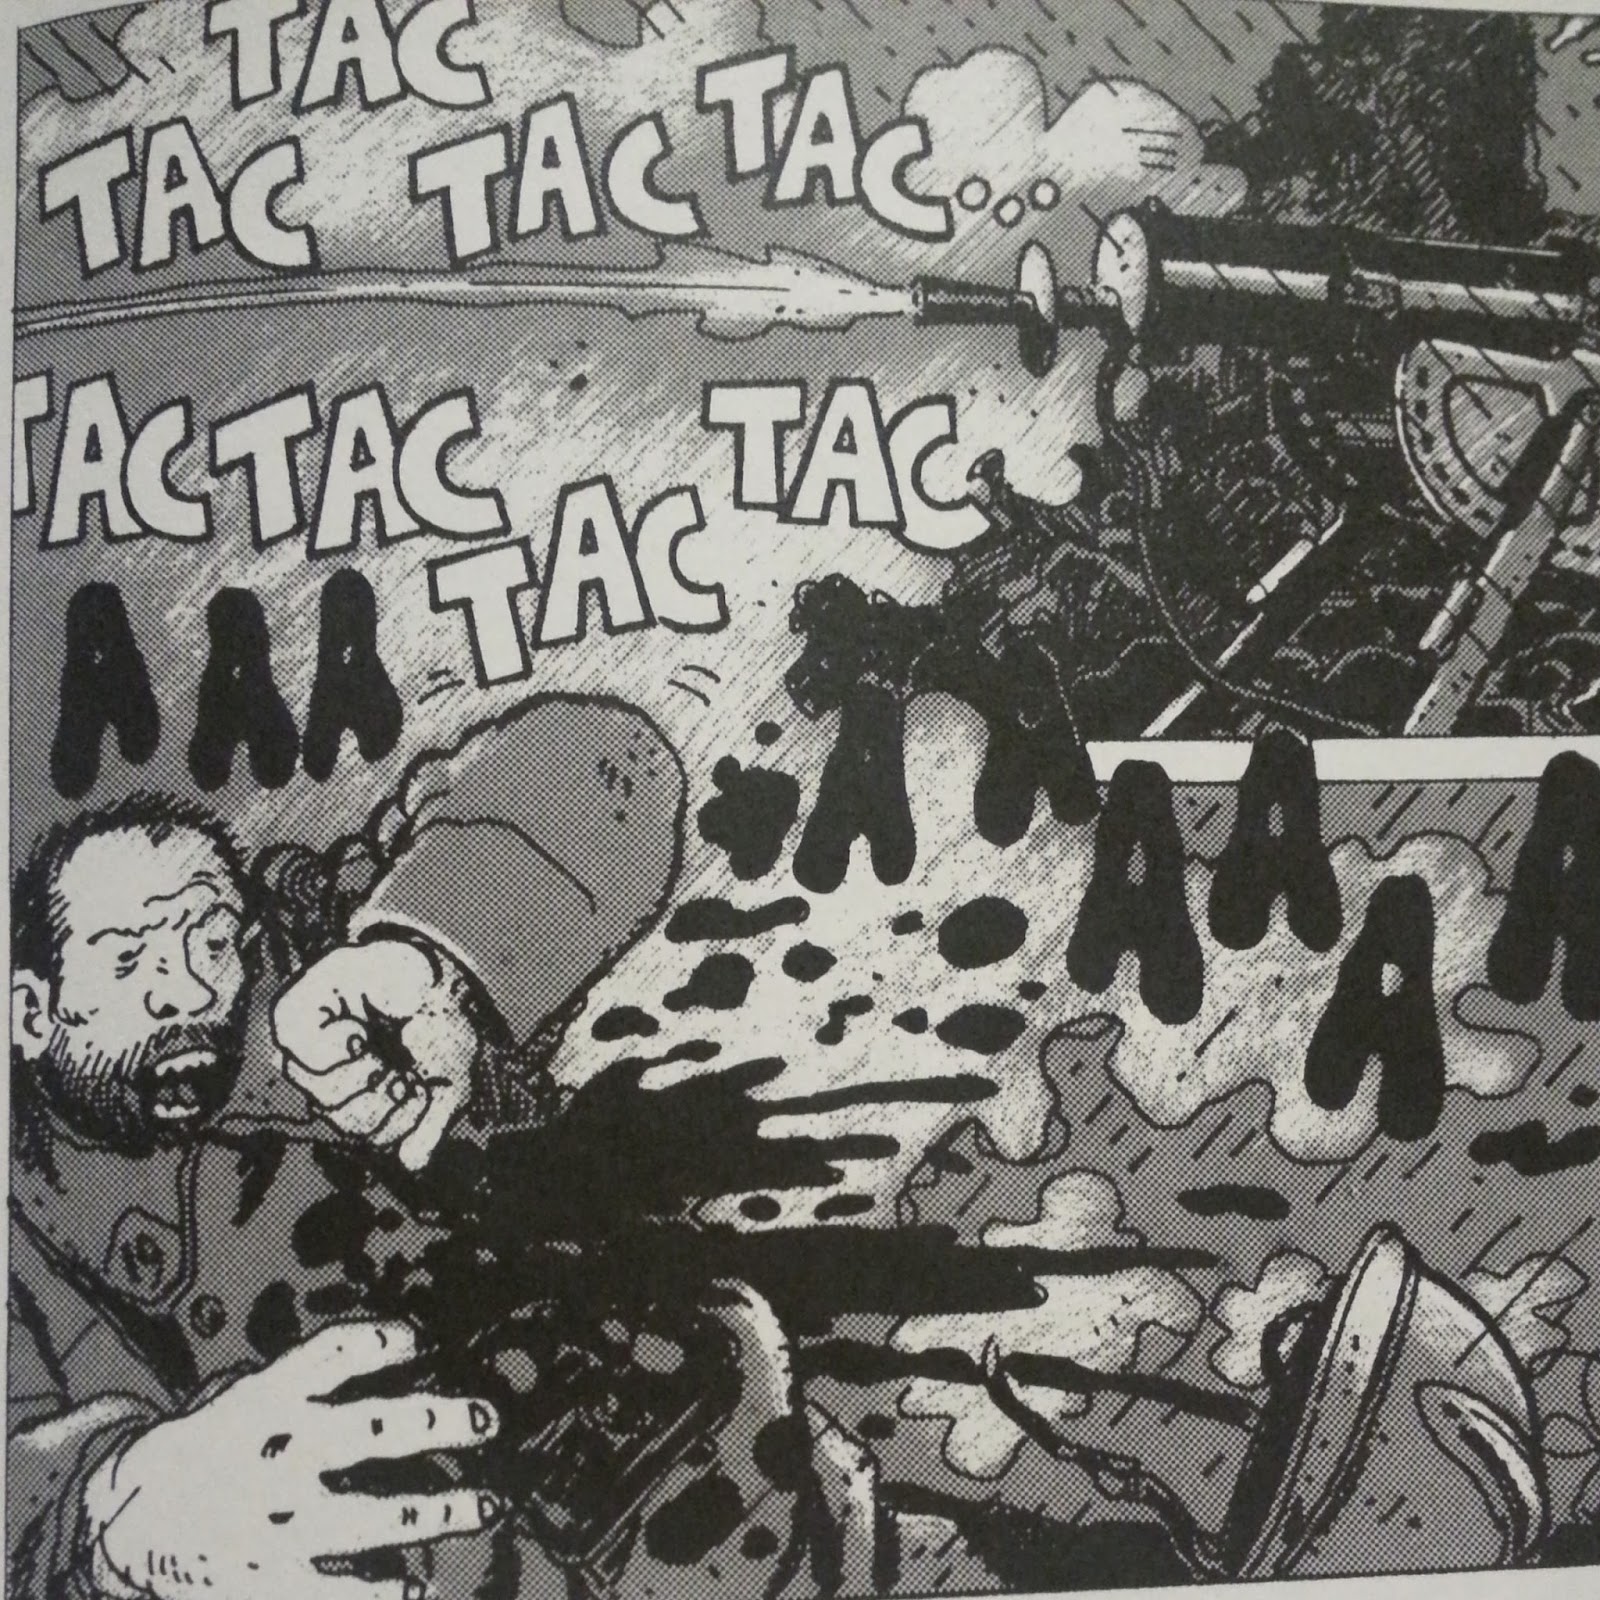 It Was the War of the Trenches by Jacques Tardi